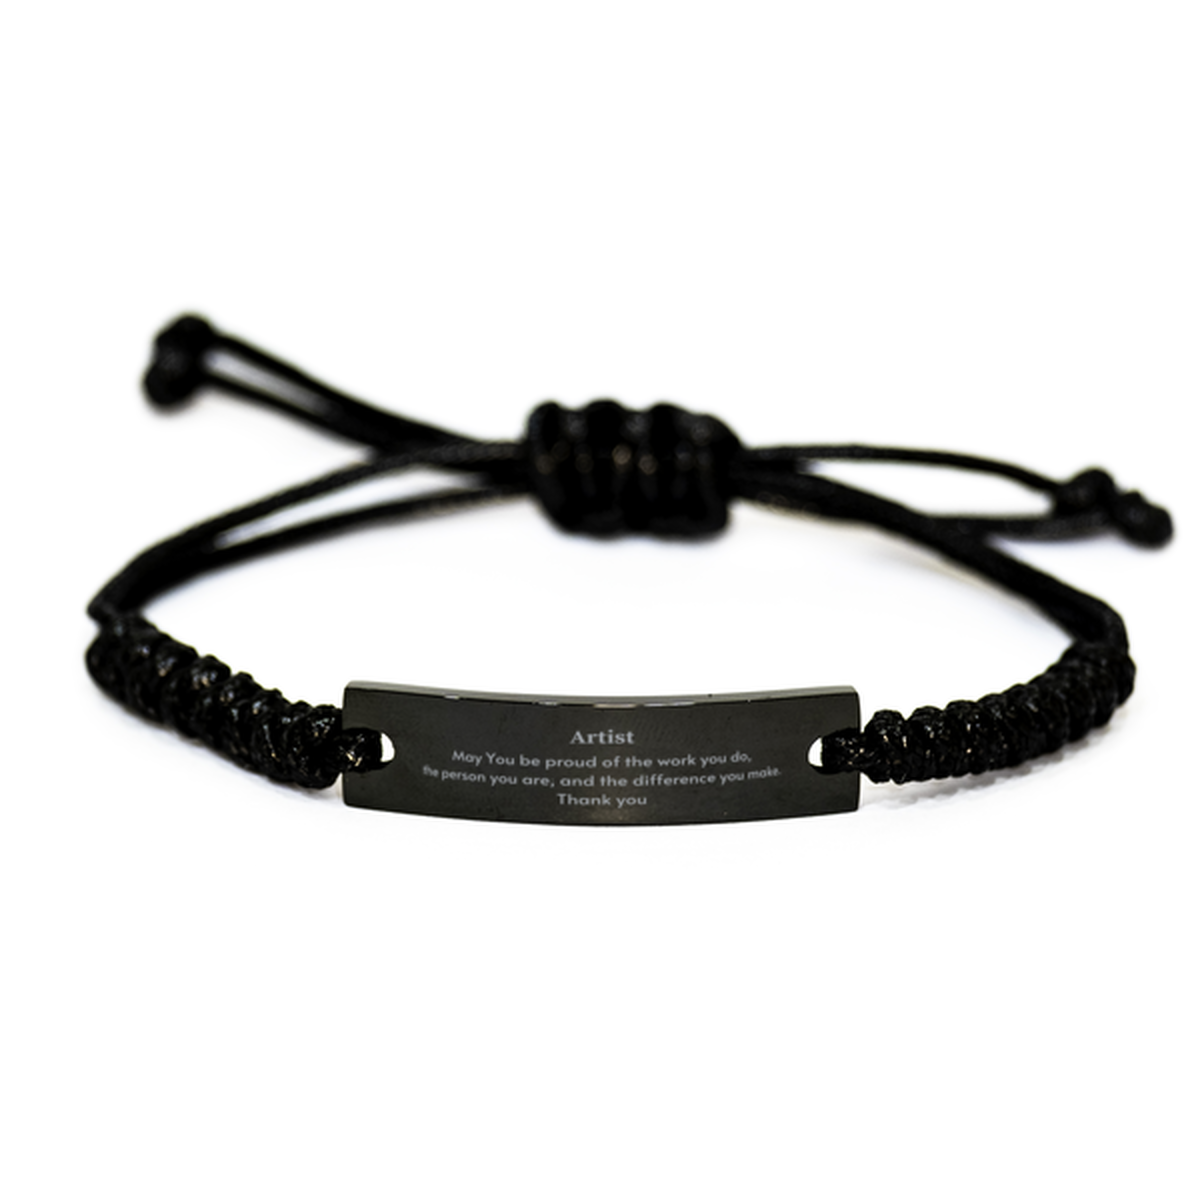 Heartwarming Black Rope Bracelet Retirement Coworkers Gifts for Artist, Artist May You be proud of the work you do, the person you are Gifts for Boss Men Women Friends